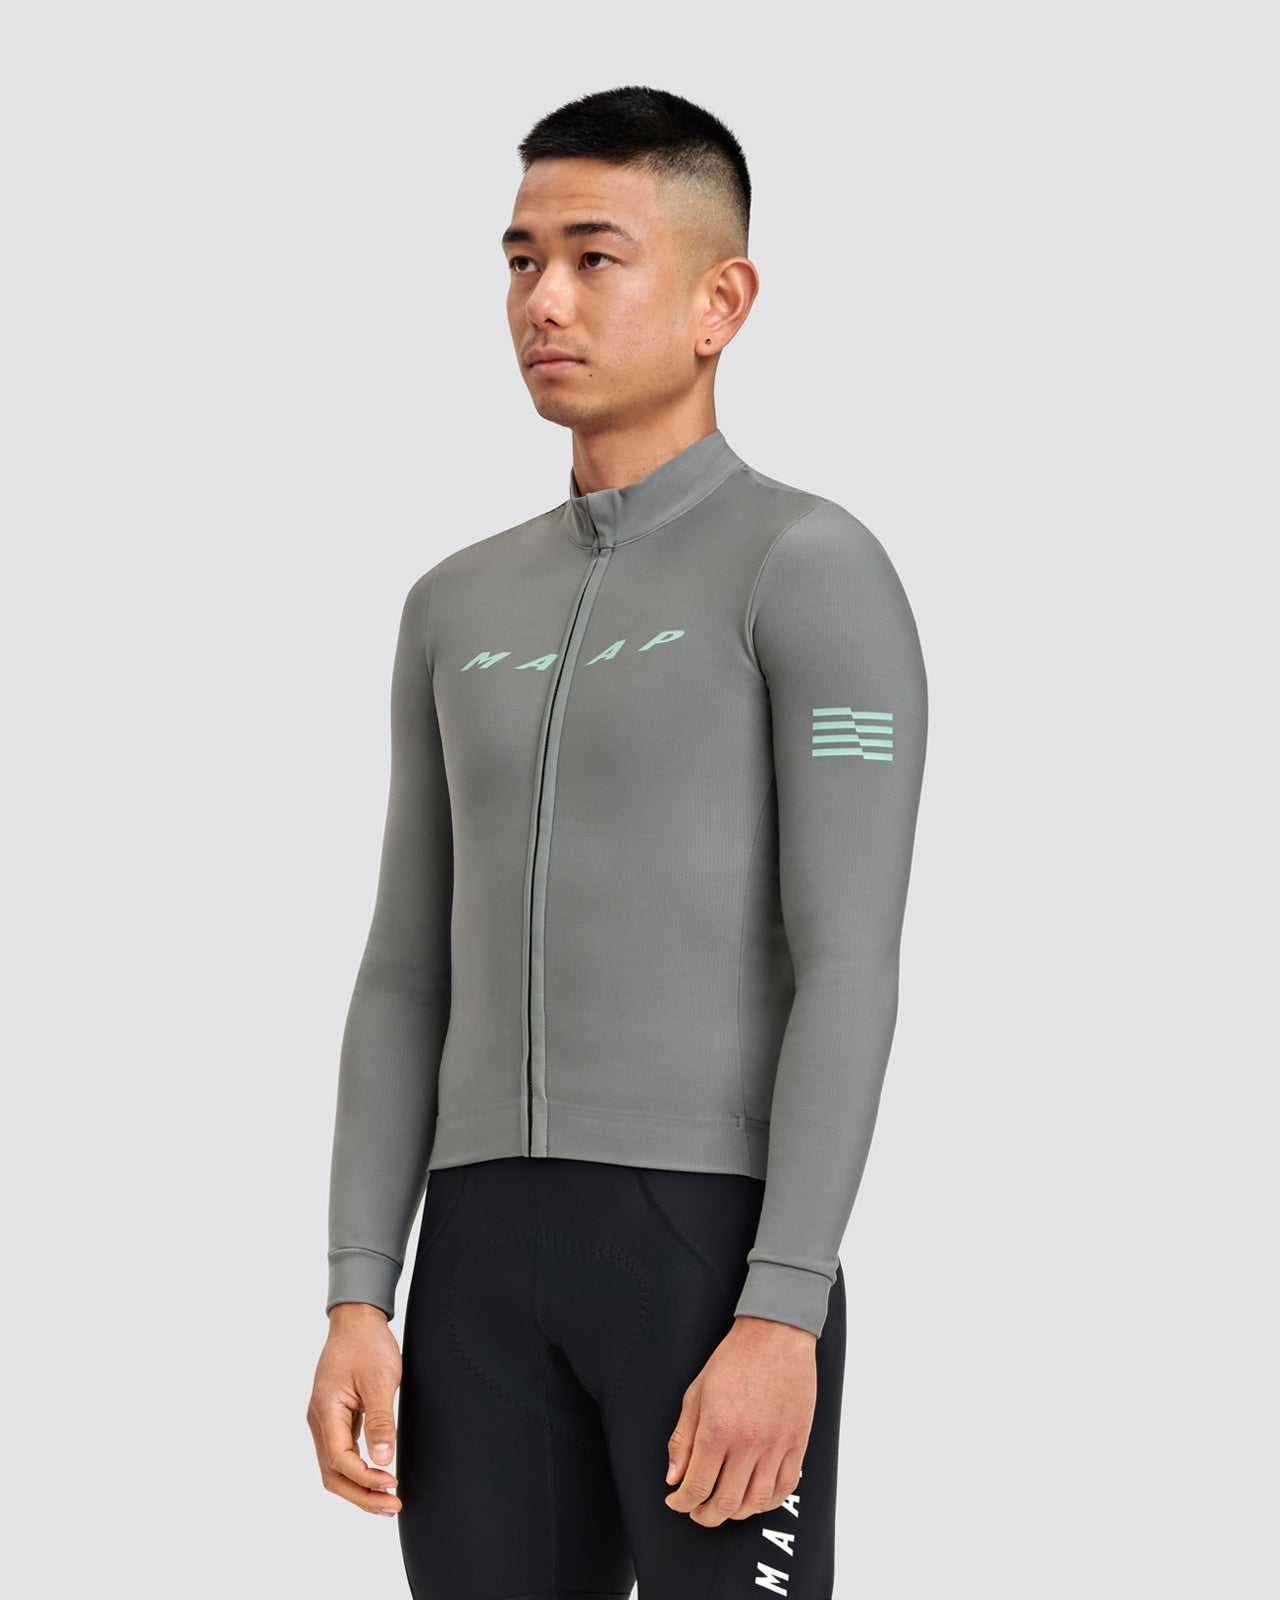 Evade Thermal LS Jersey 2.0